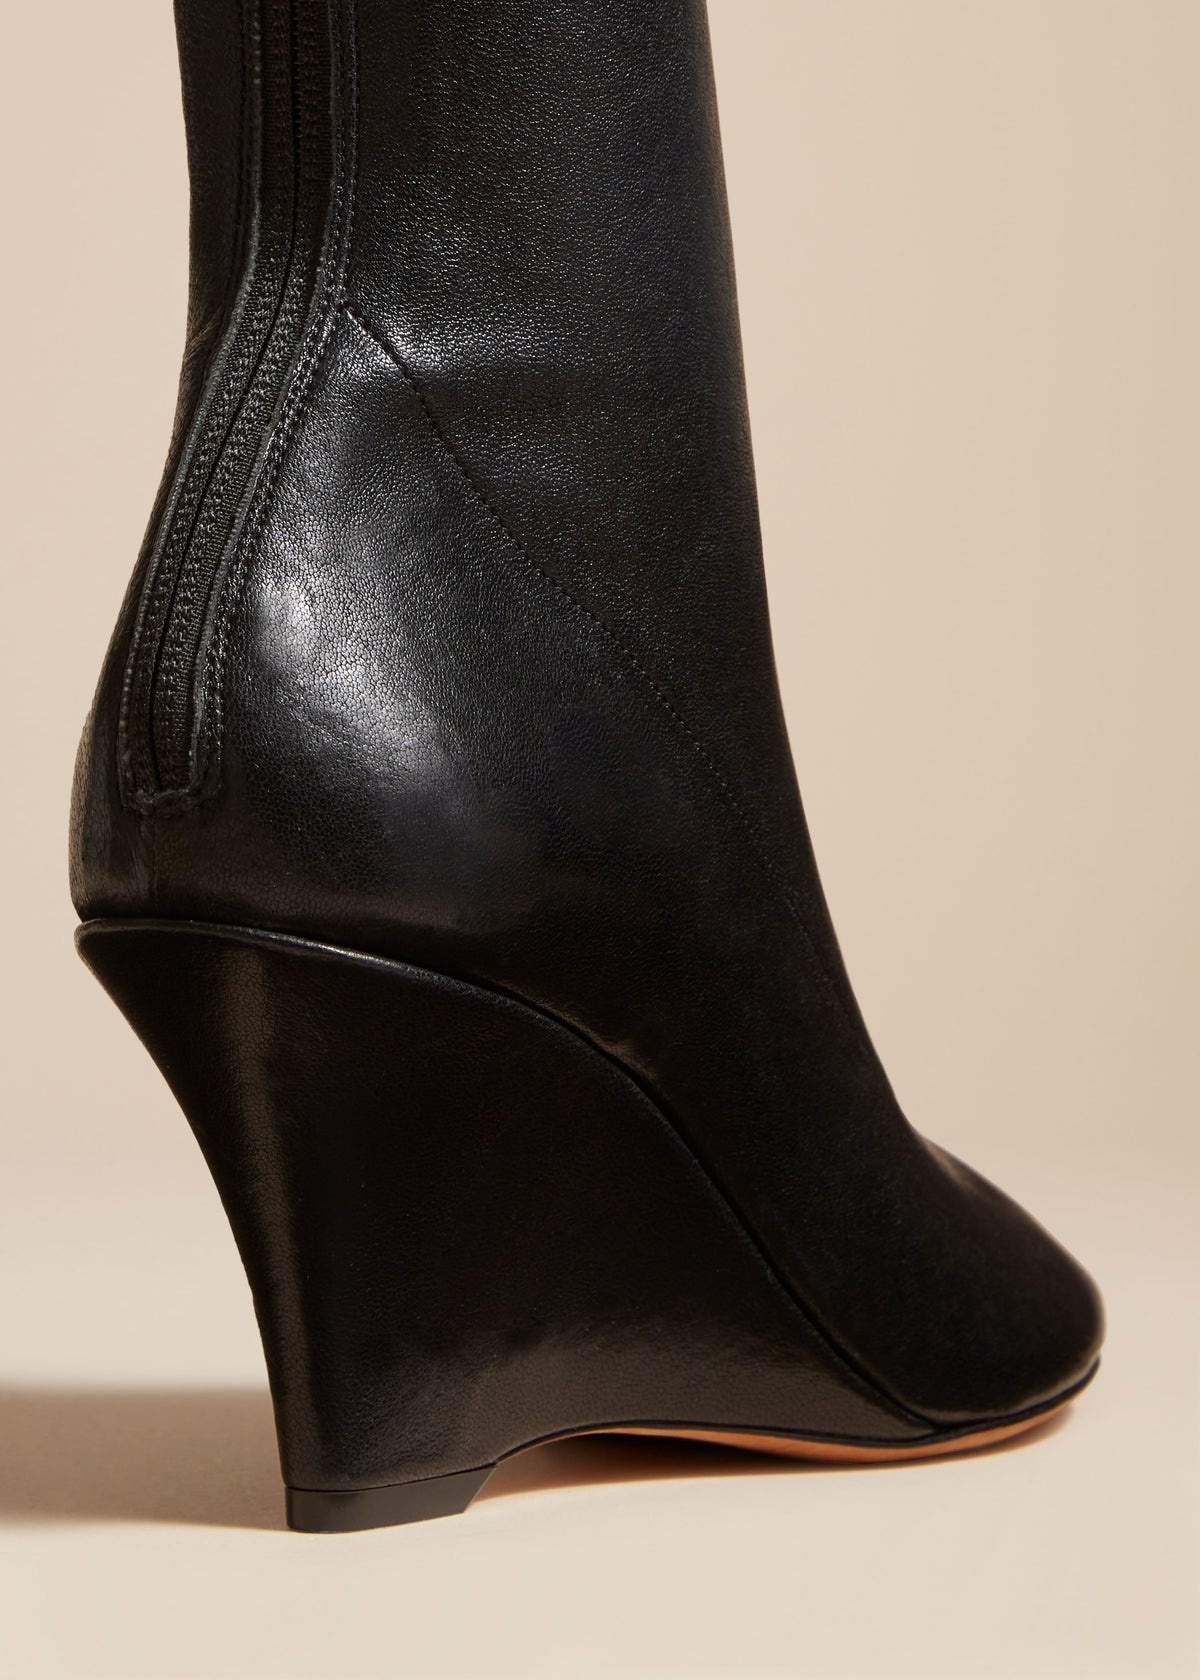 The Apollo Wedge Boot in Black Leather - 3